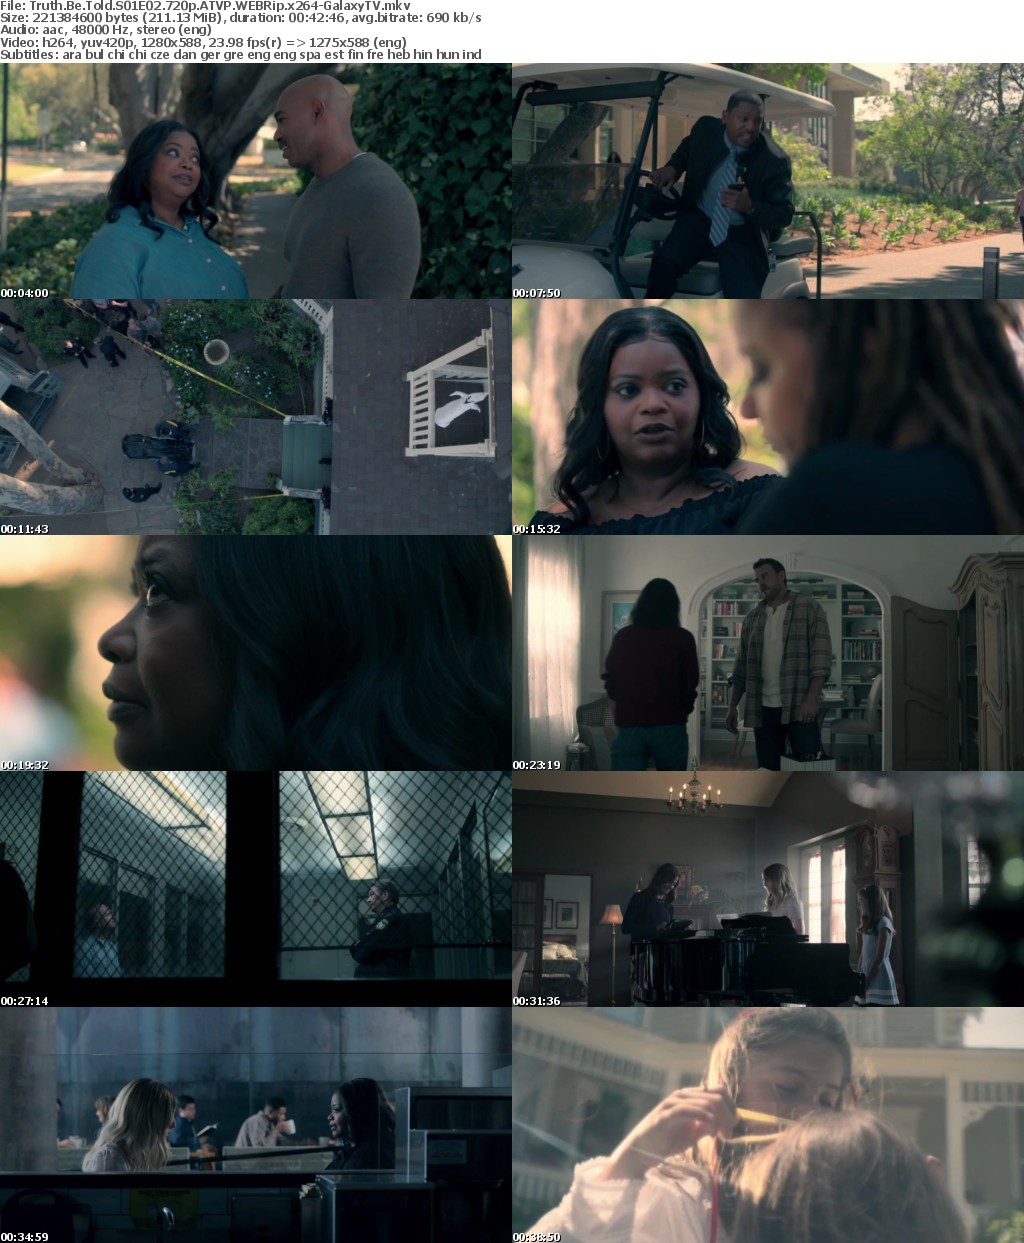 Truth Be Told 2019 S01 COMPLETE 720p ATVP WEBRip x264-GalaxyTV